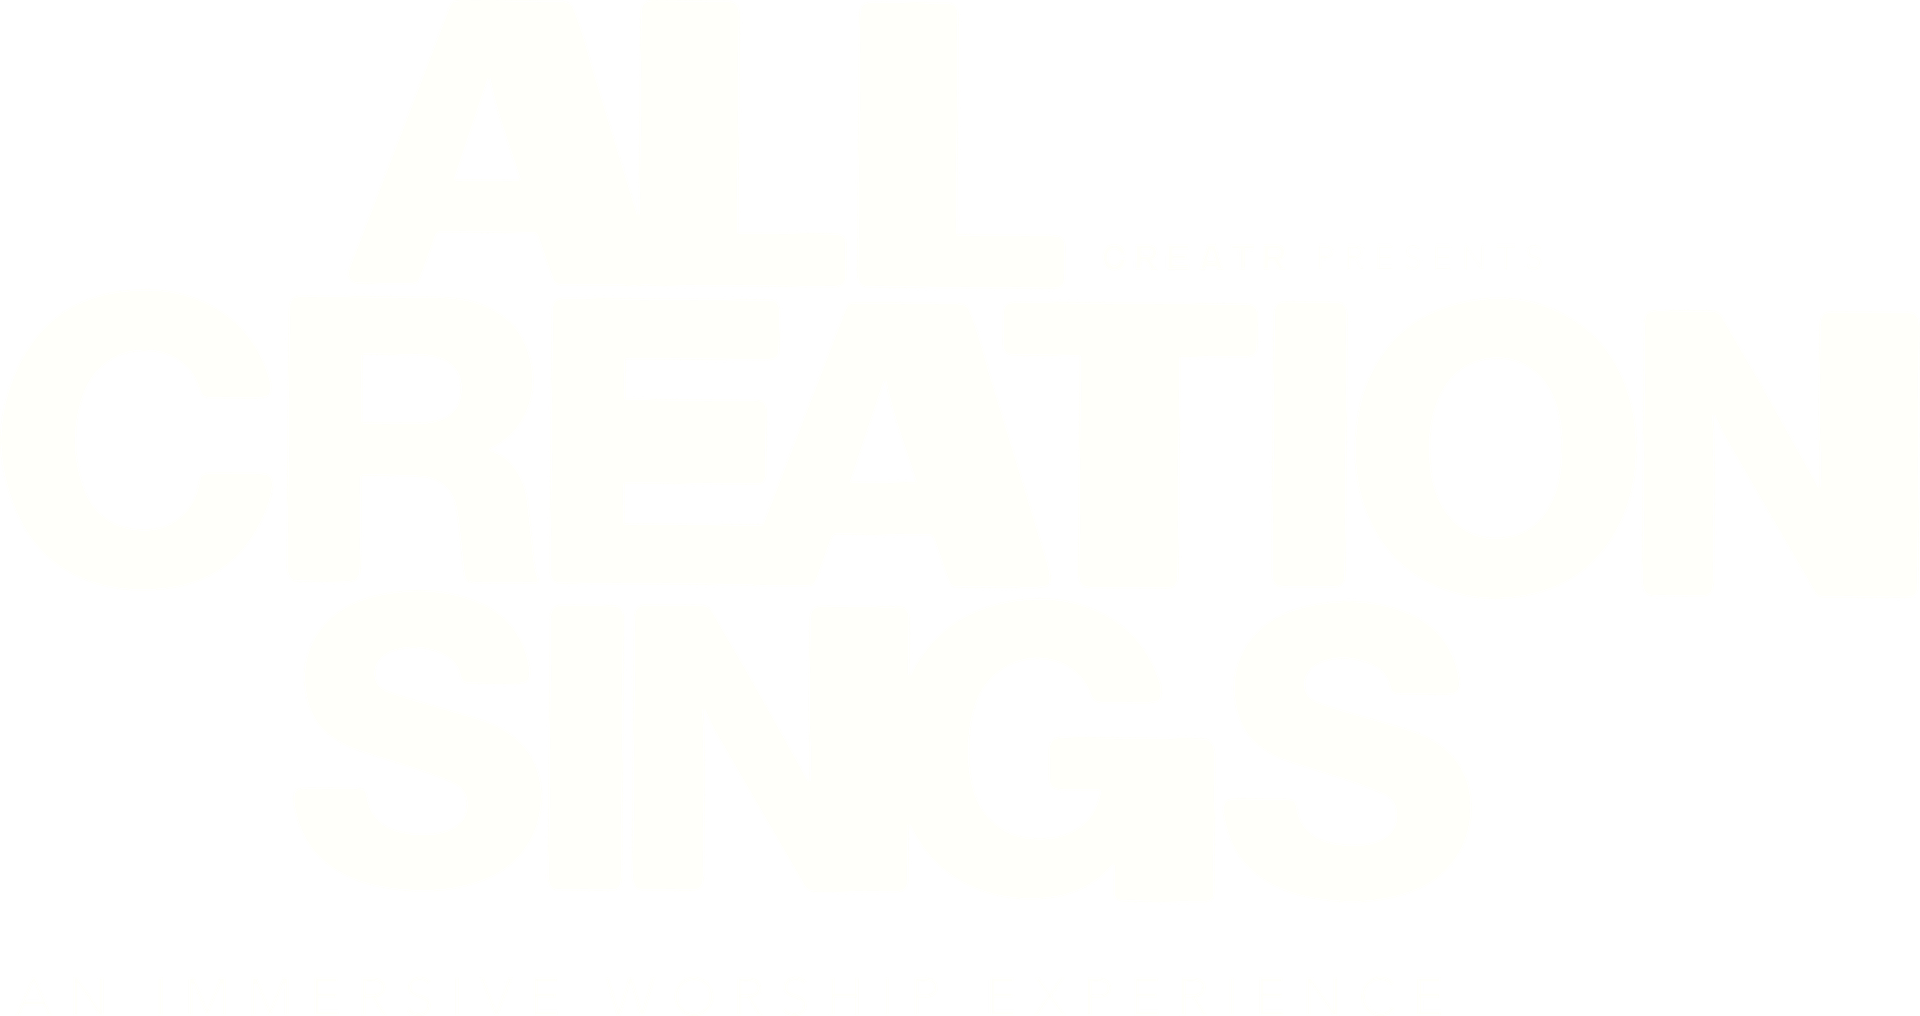 All Creation Sings: Creatr Presents an Immersive Worship Experience